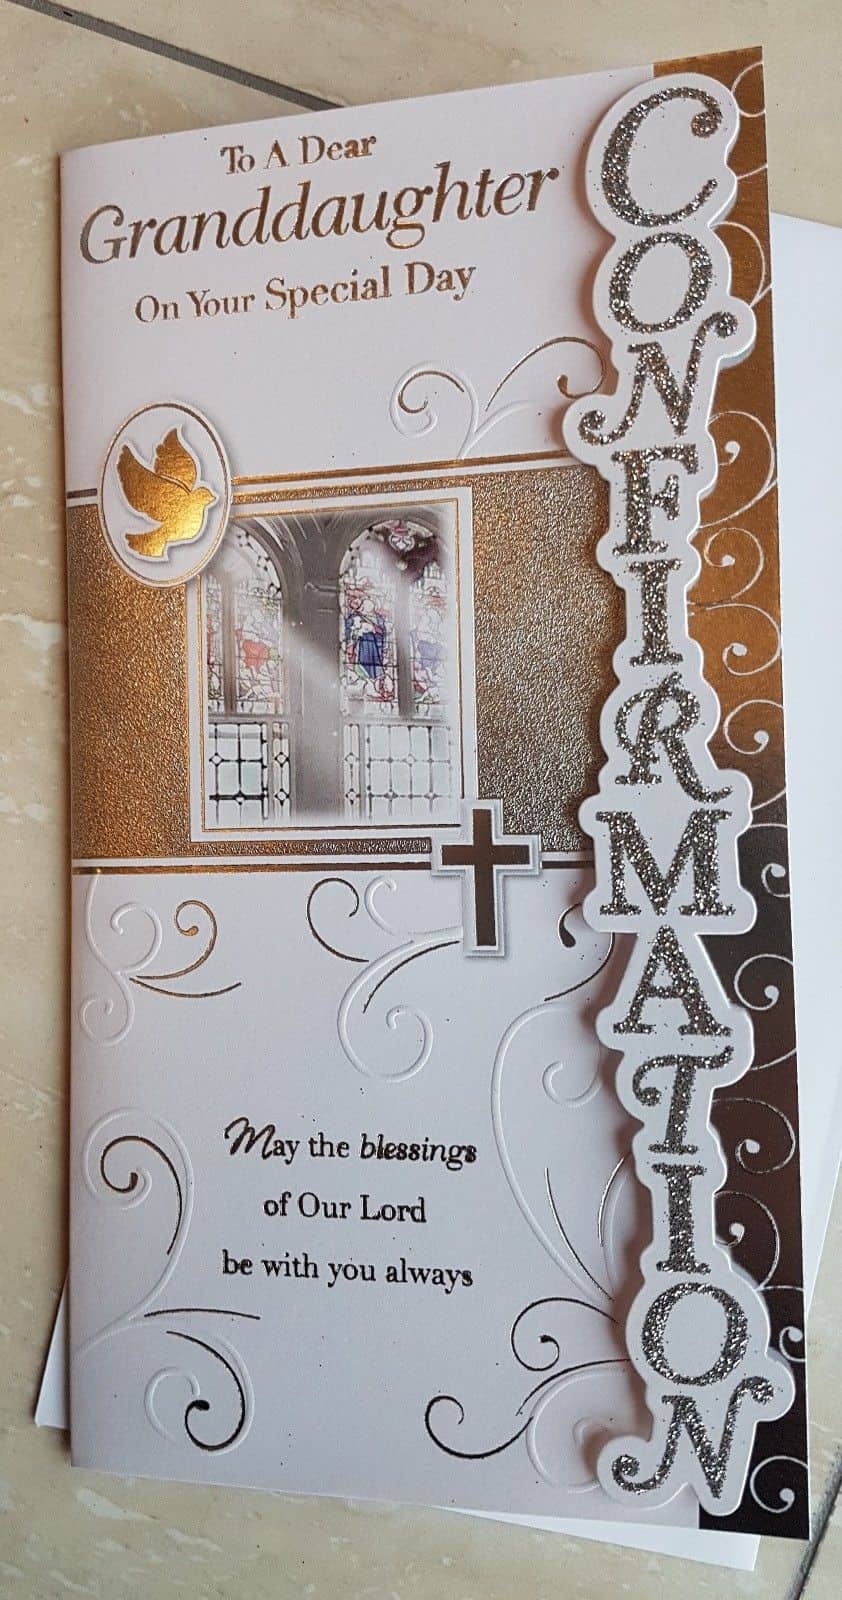 granddaughter-confirmation-card-with-love-gifts-cards